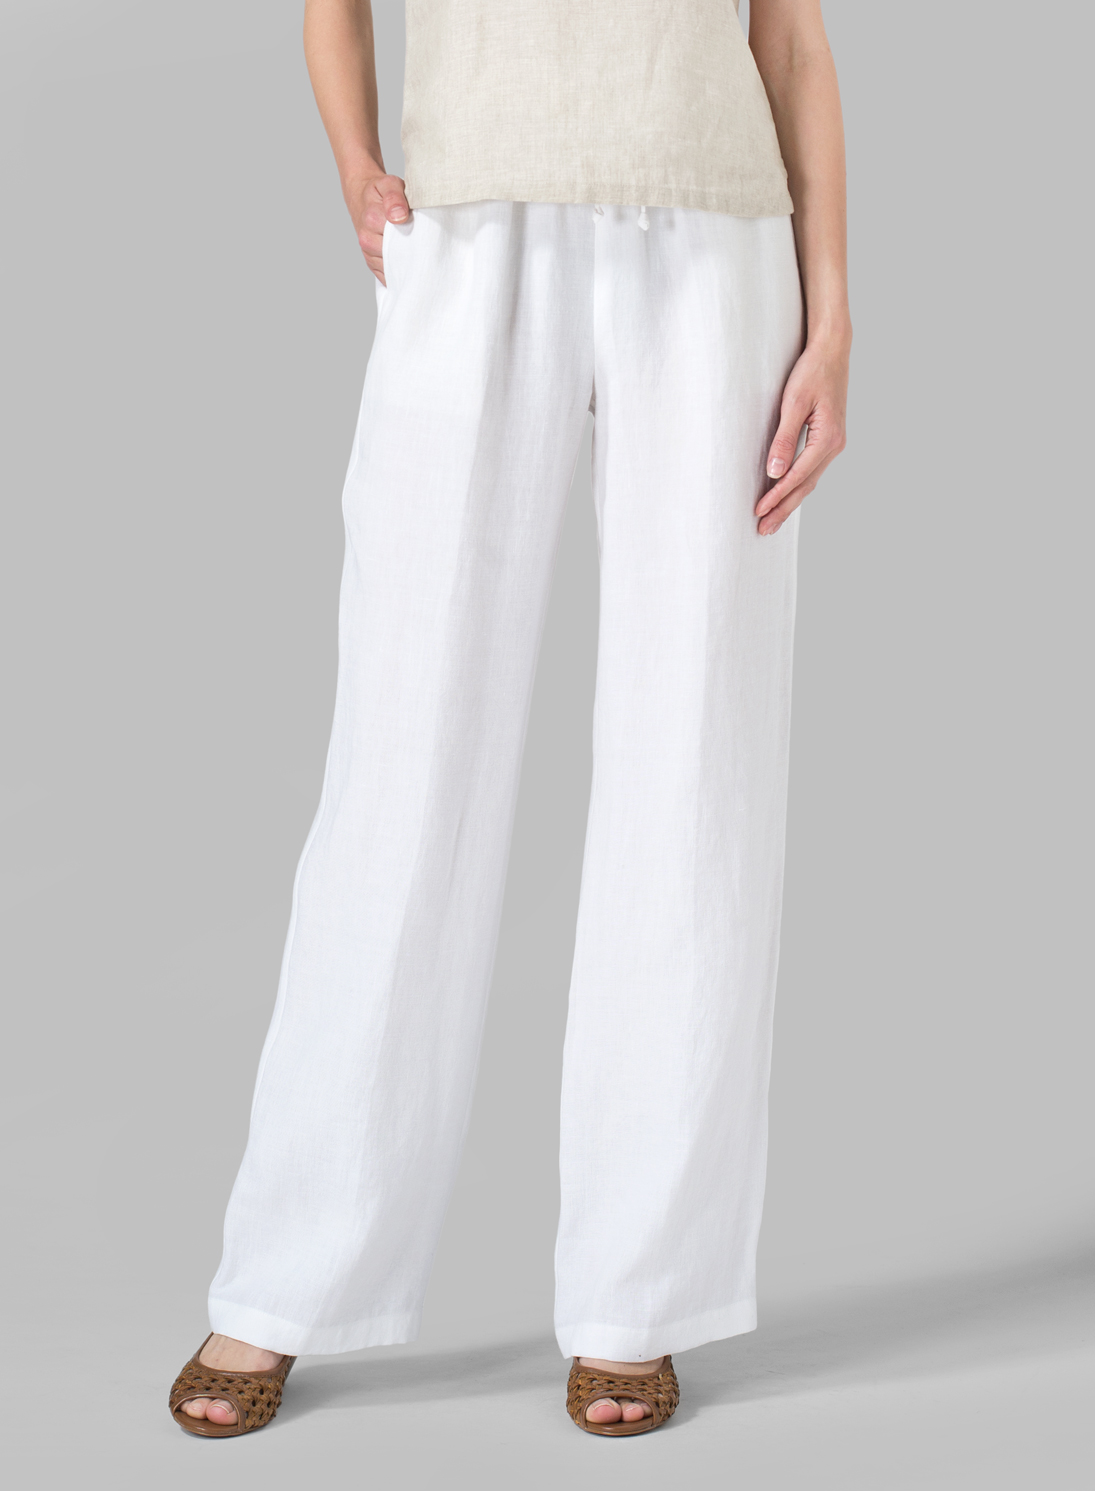 Linen Long Straight Pull-On Pants - Plus Size